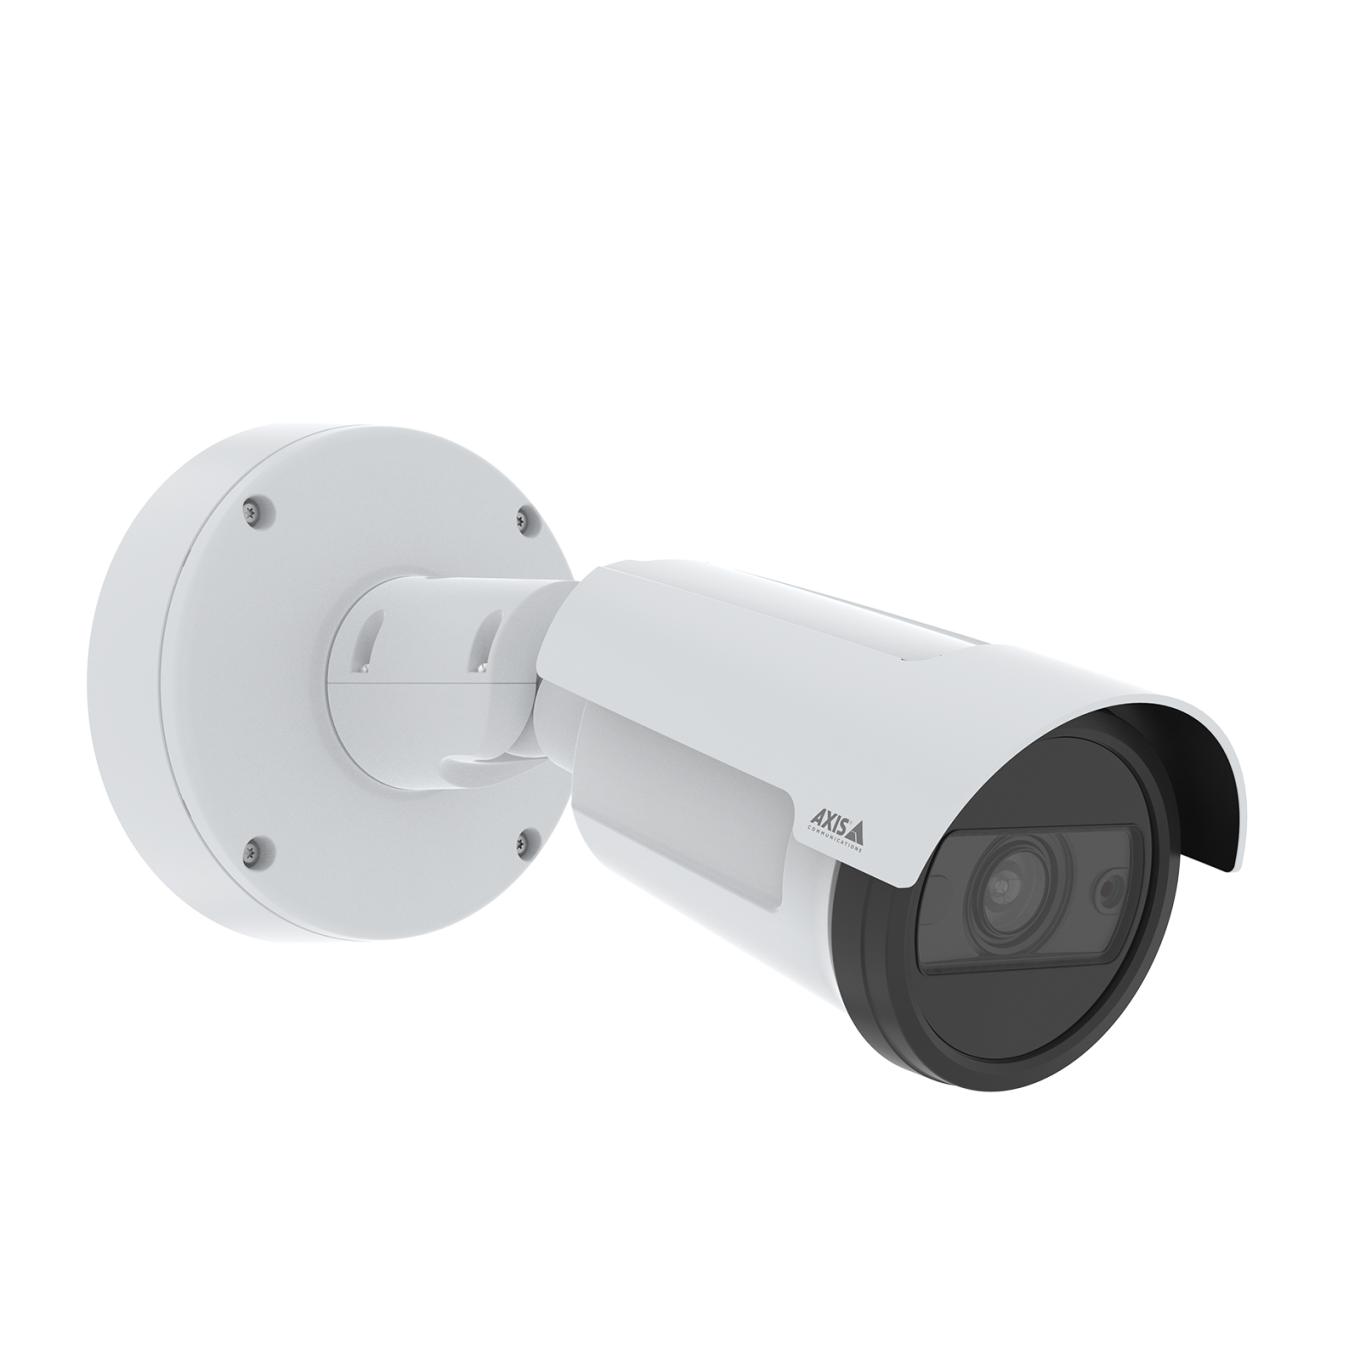 AXIS P1465-LE Bullet Camera | Axis Communications